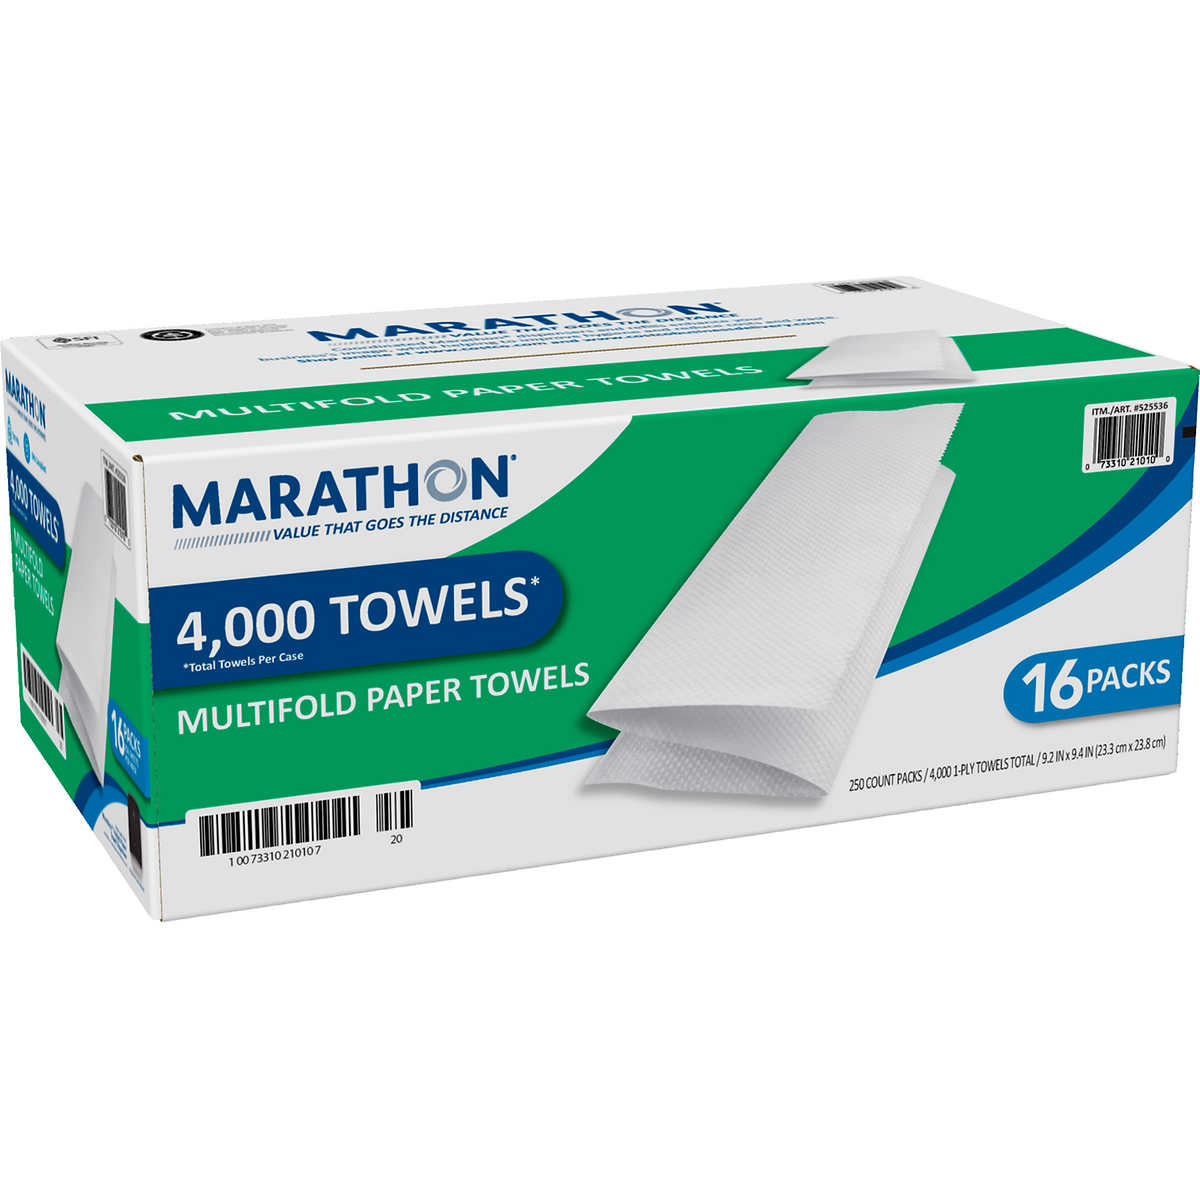 White Marathon Multifold Paper Towels 4000 Towels Per Case Free Shipping 